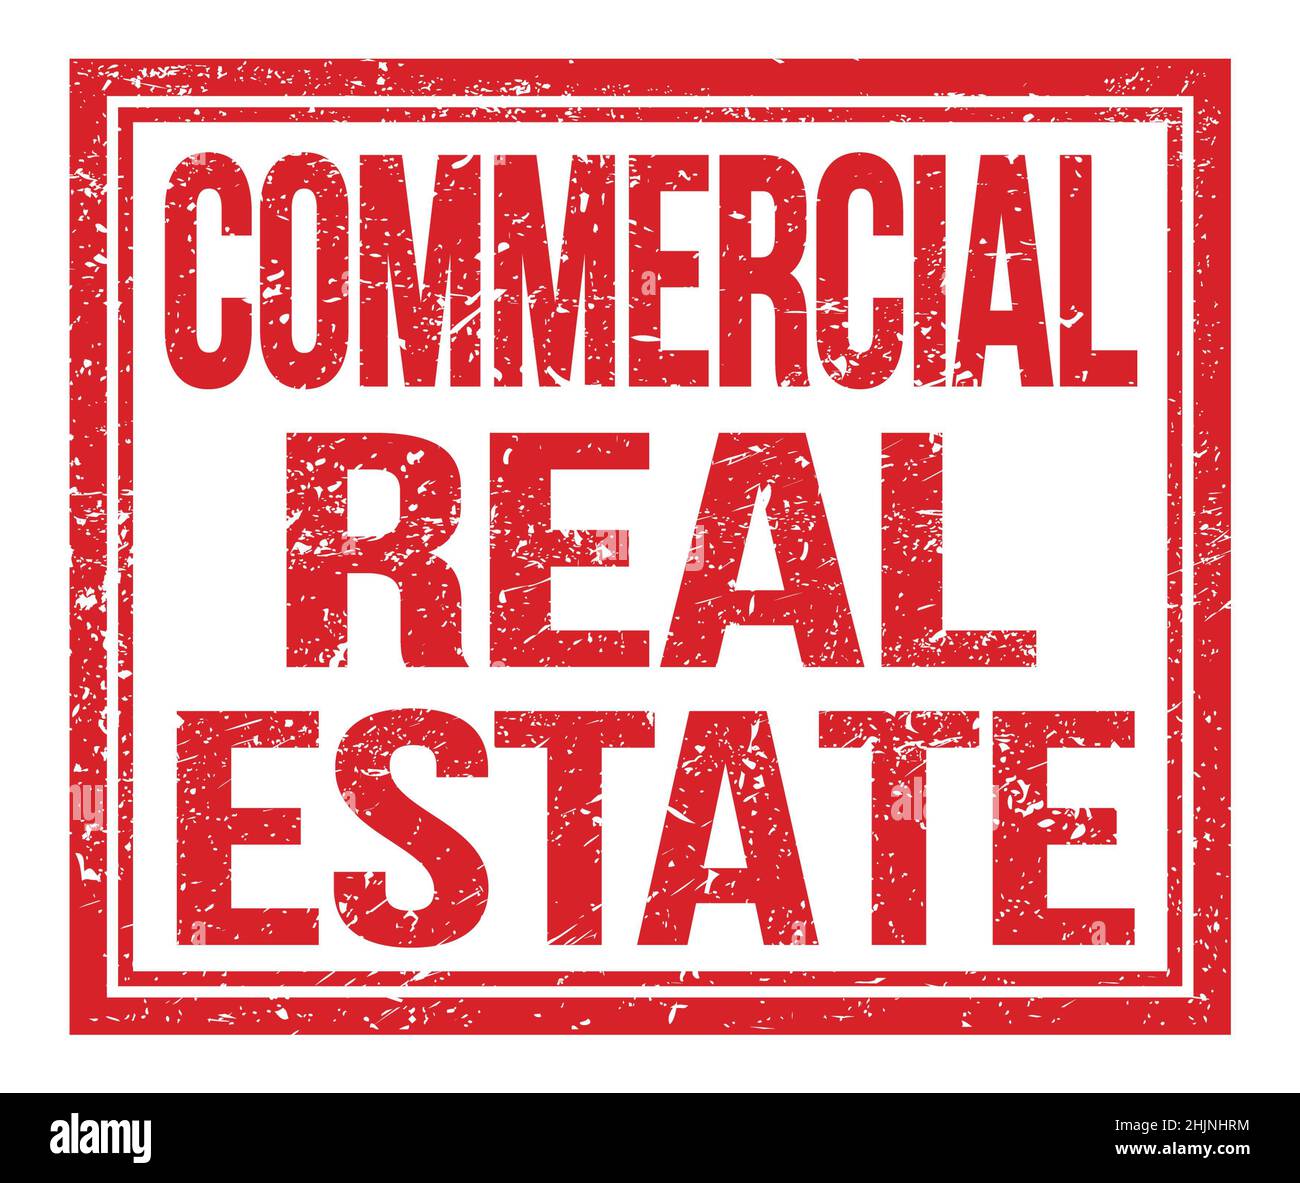 COMMERCIAL REAL ESTATE, written on red grungy stamp sign Stock Photo